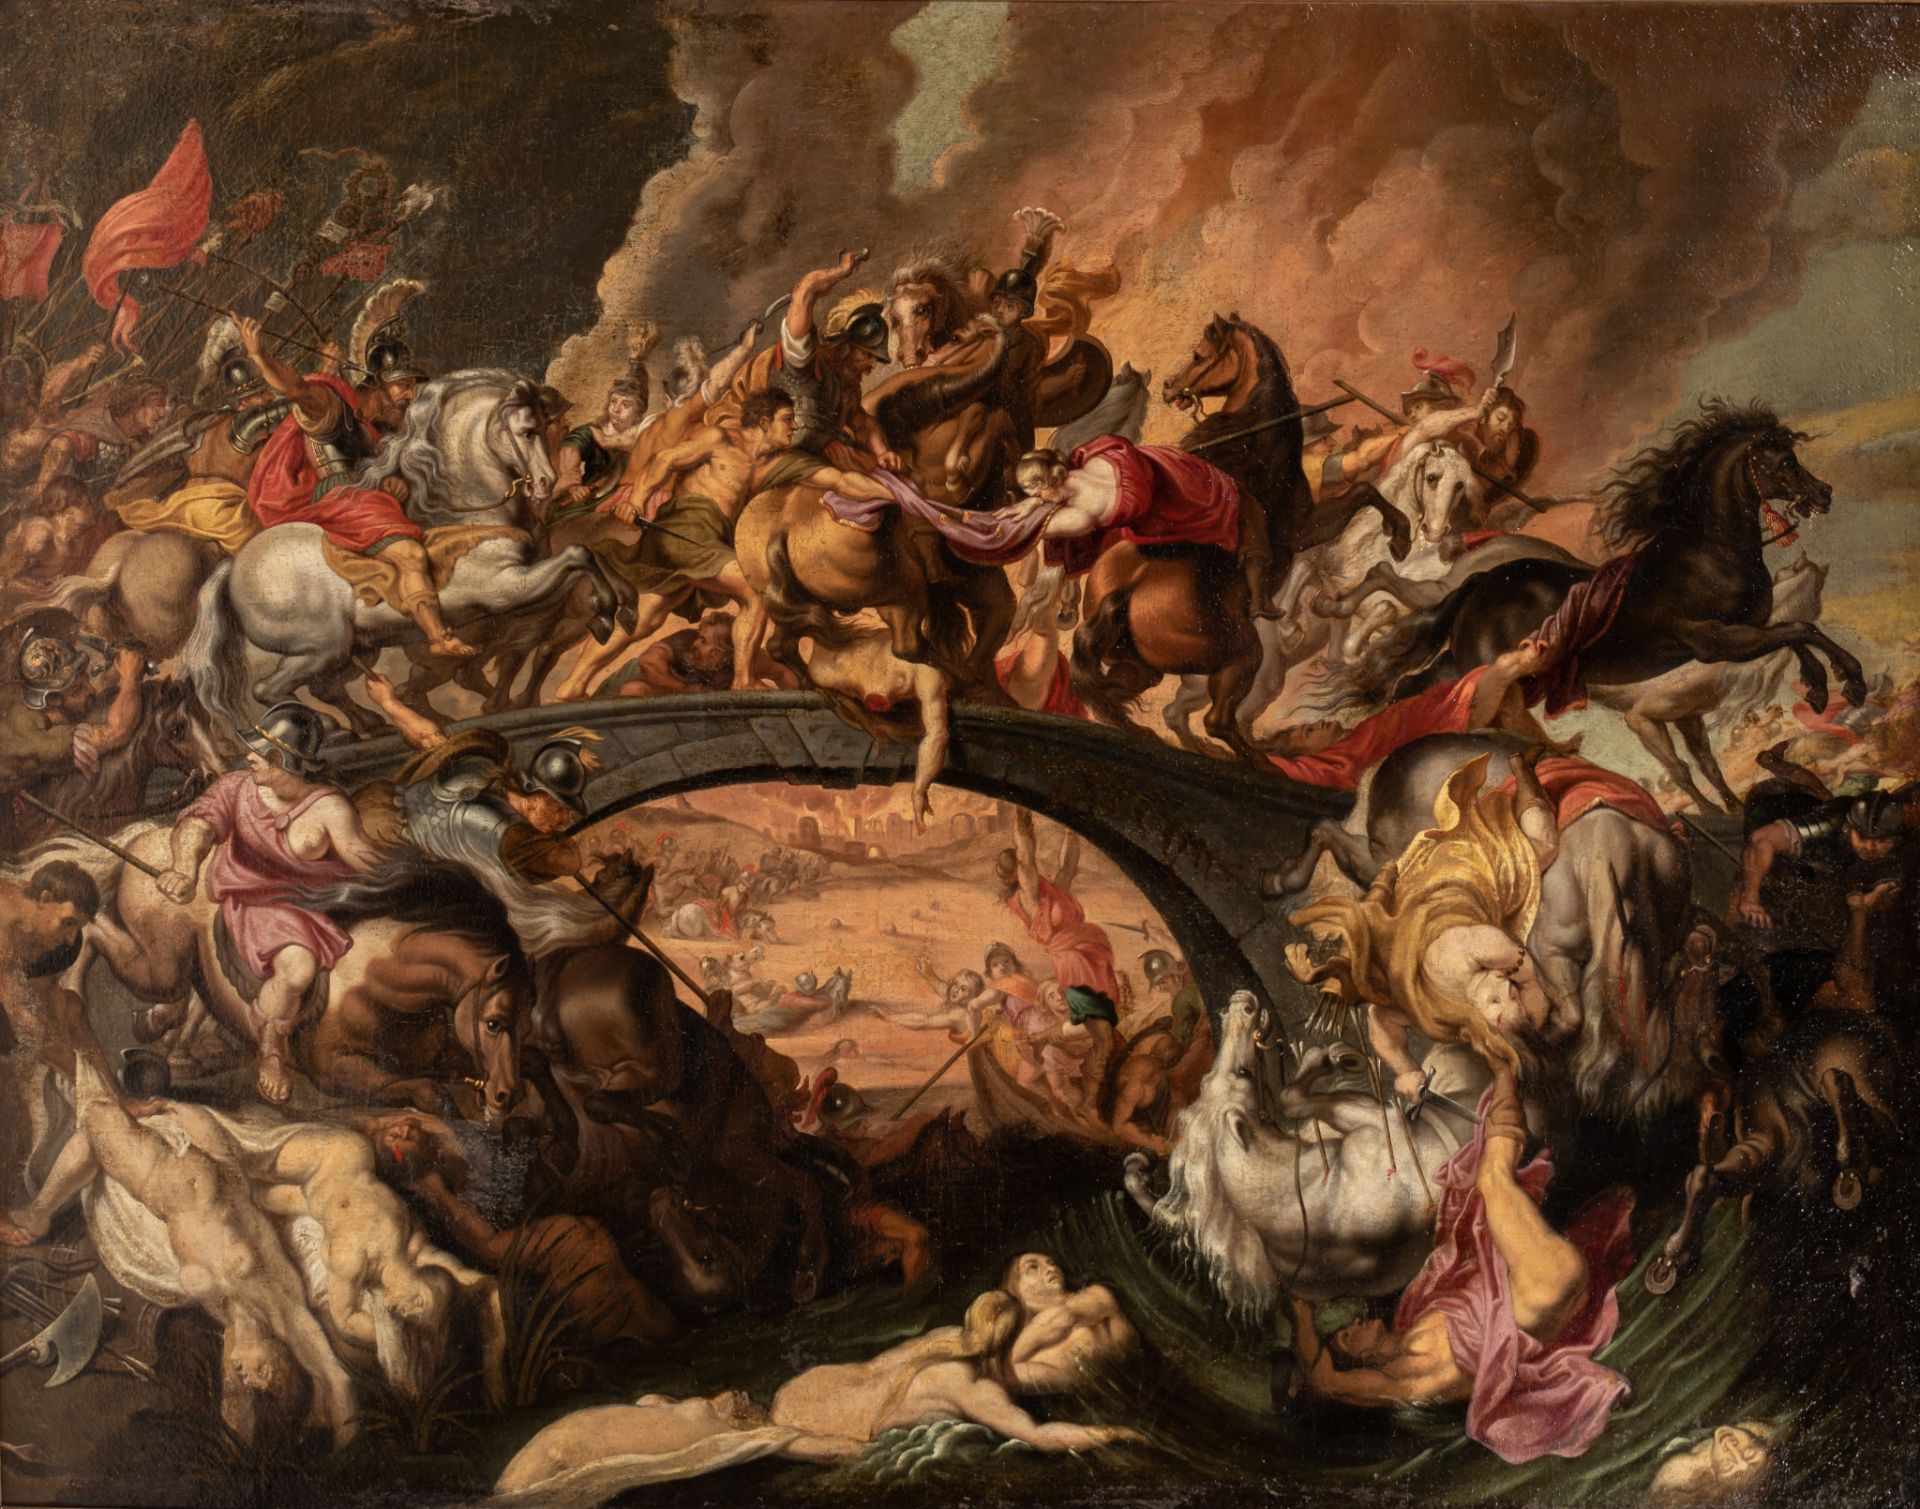 After Peter Paul Rubens, the Battle of the Amazons, oil on canvas